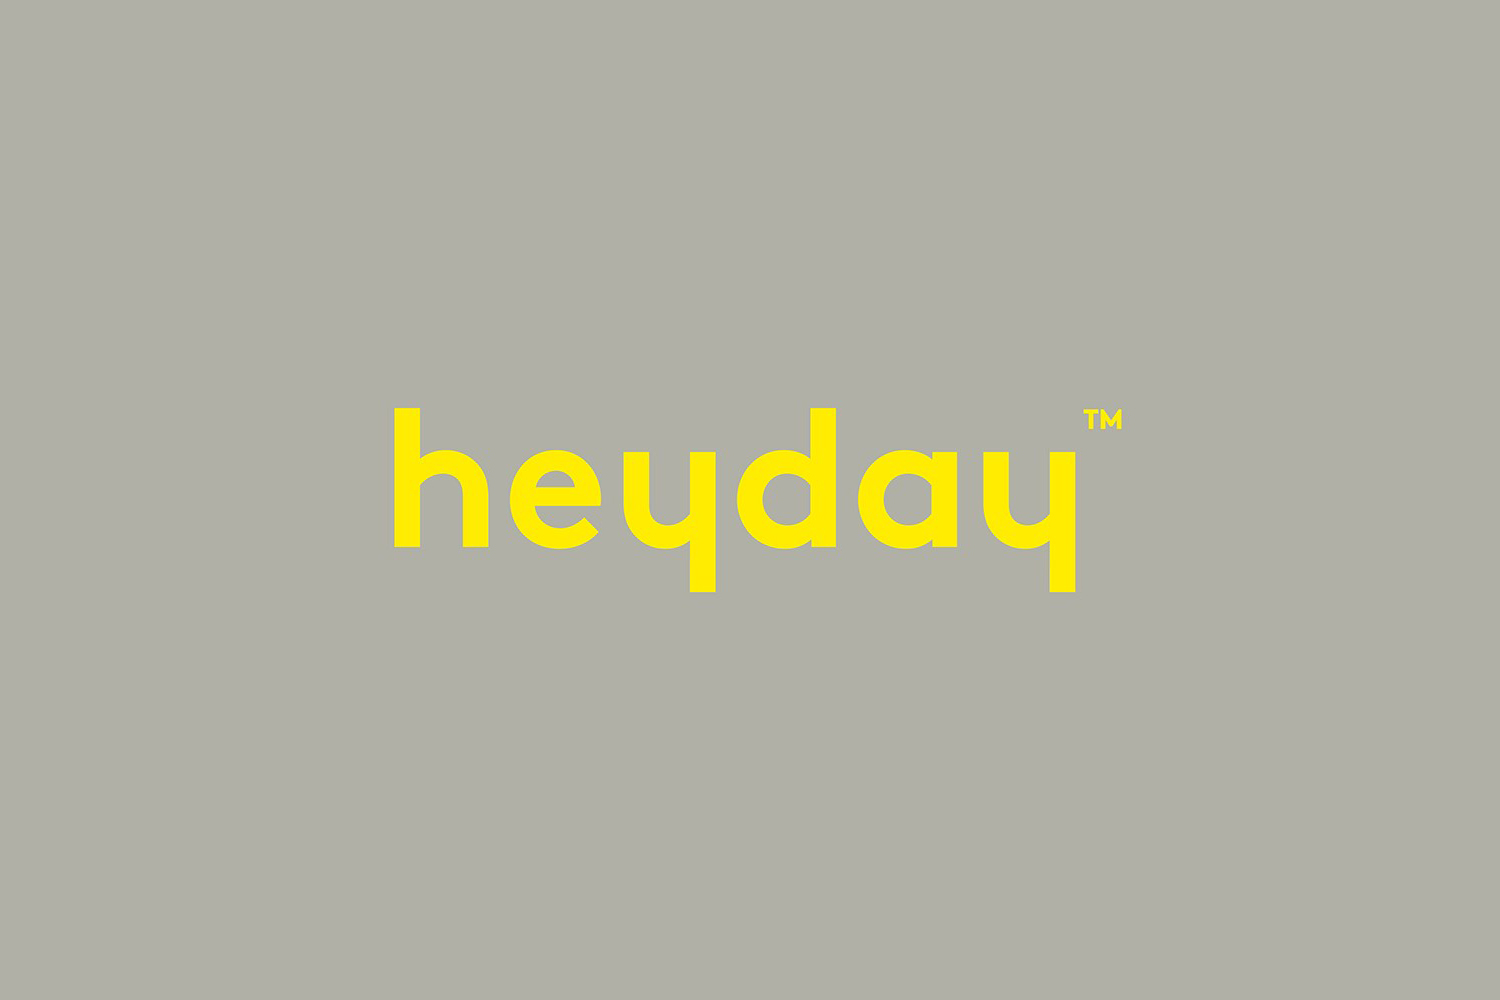 Logo, visual identity, copywriting and packaging design by Collins for Trget's new own-brand consumer tech and accessories range Heyday